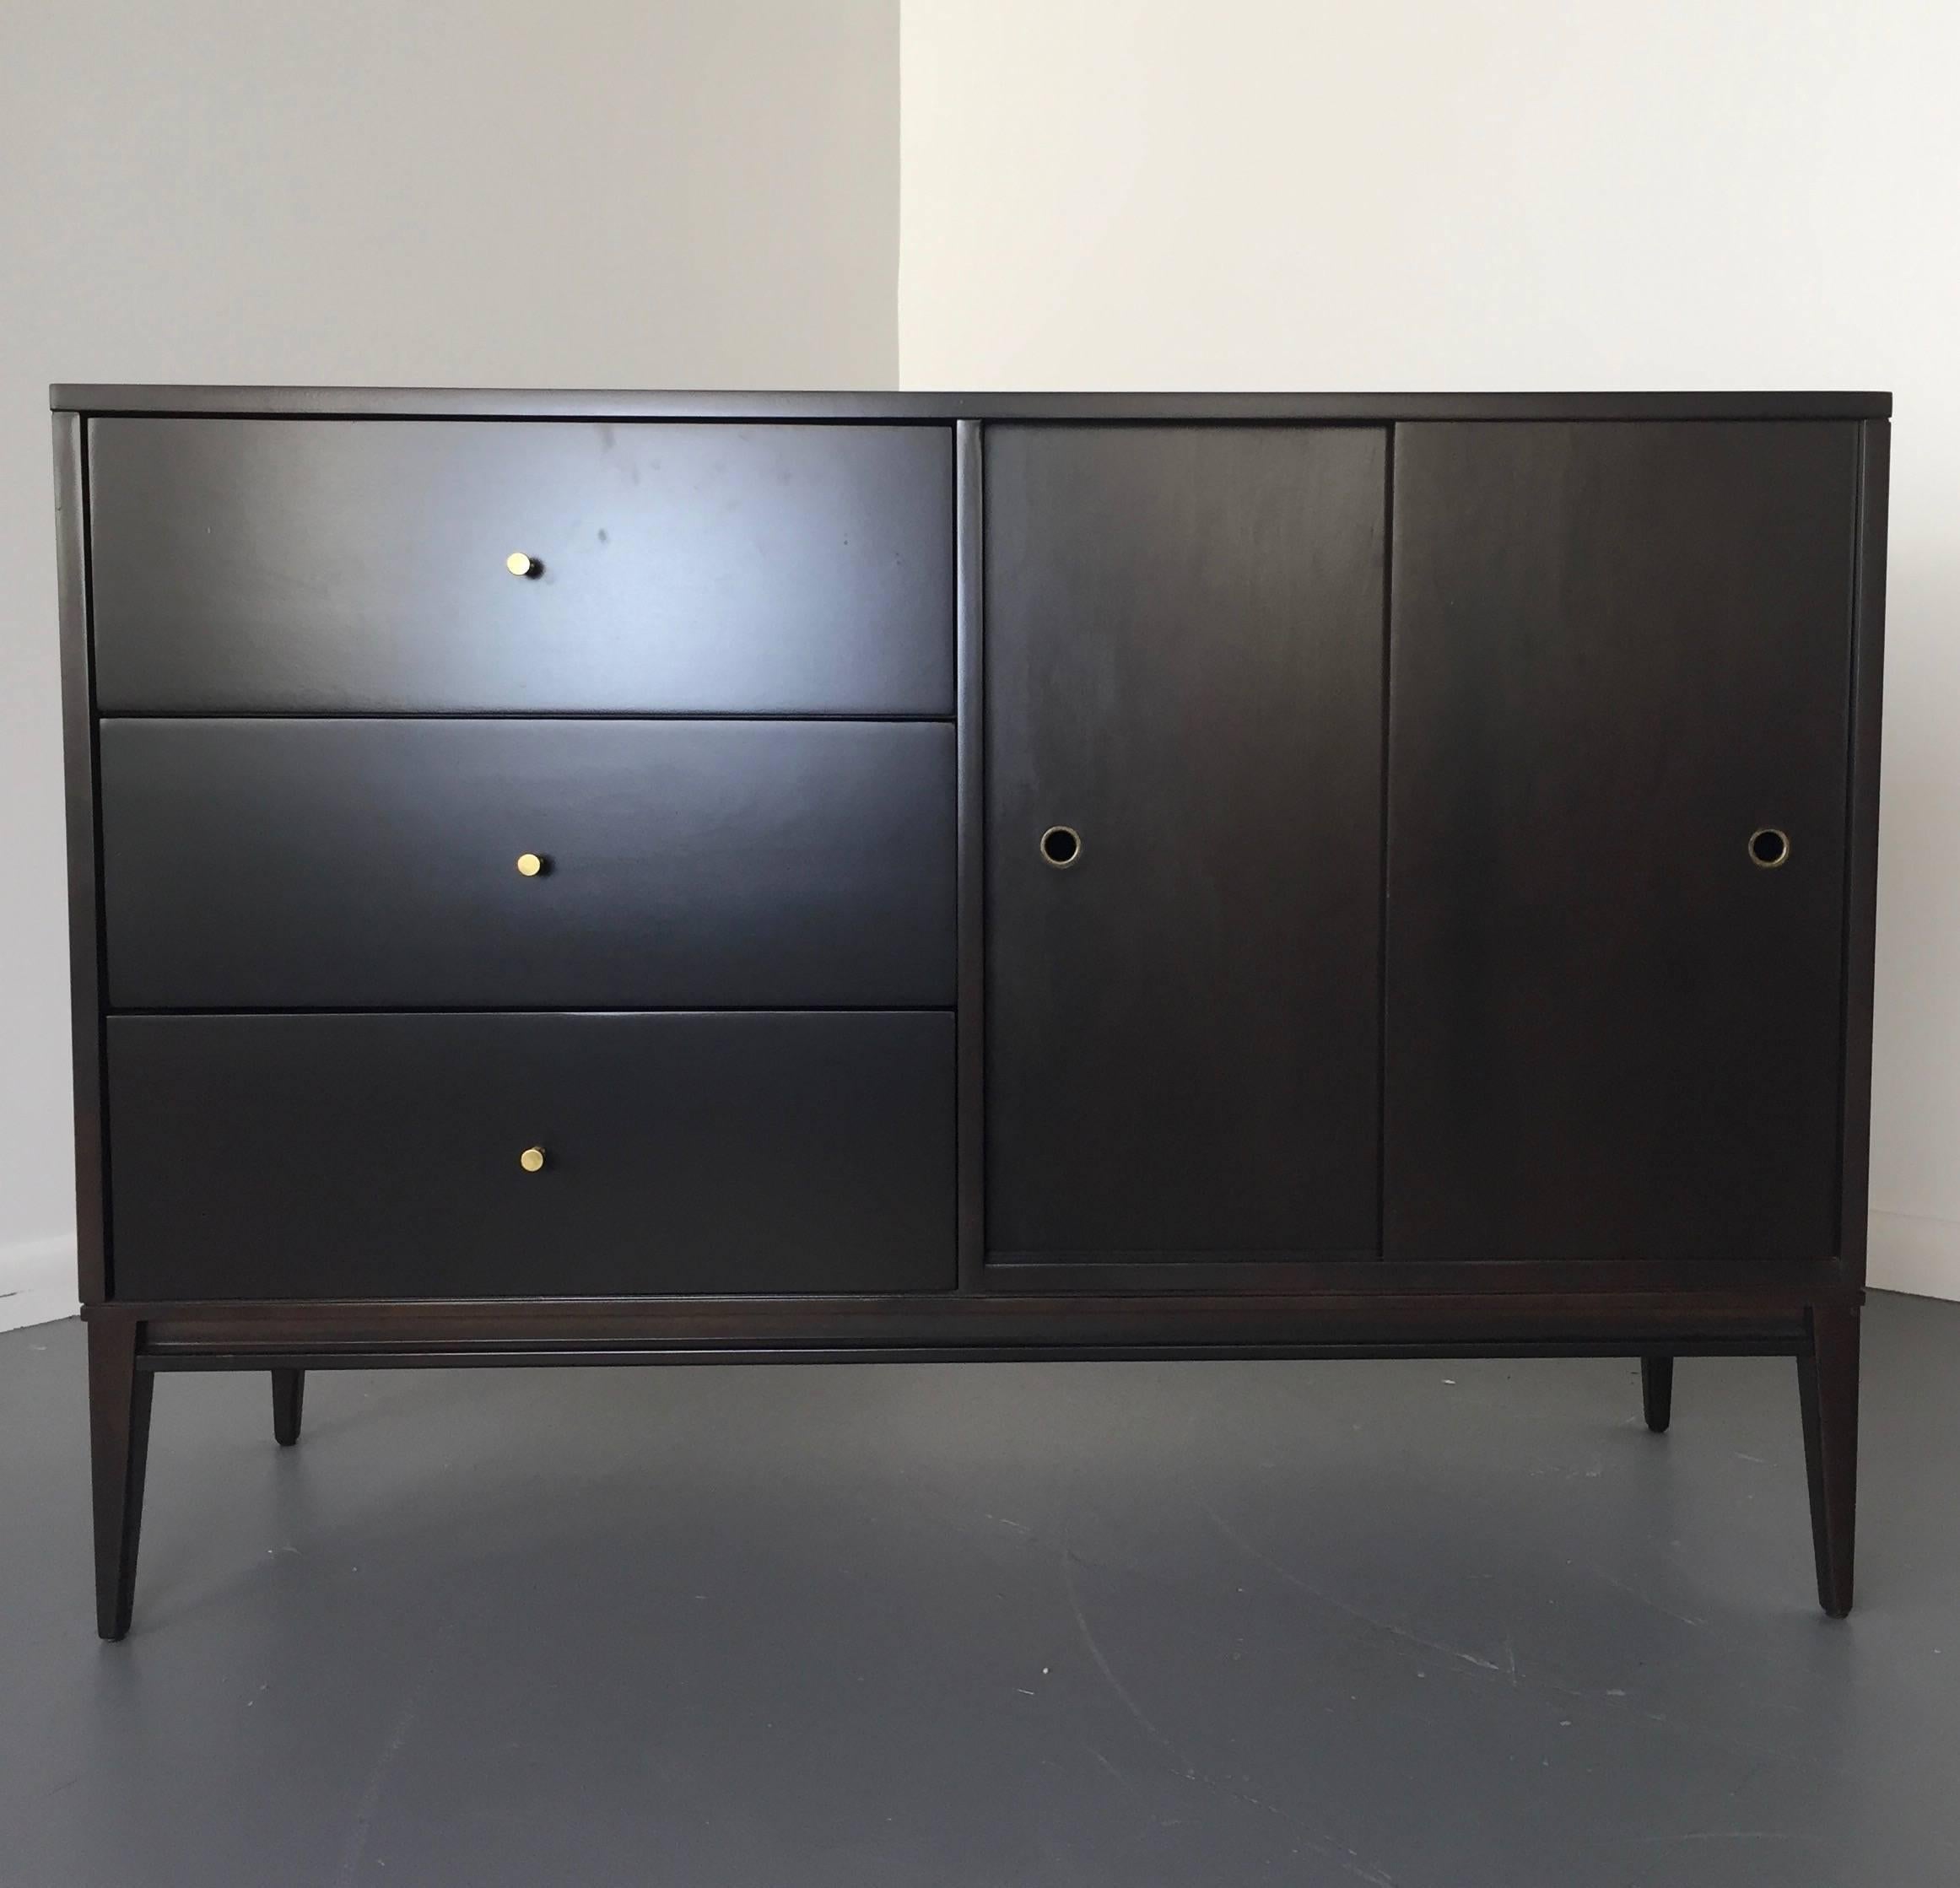 This small sideboard was designed by Paul McCobb for Winchendon Furniture Co. It has had a ground up restoration refinished with a beautiful dark stain.